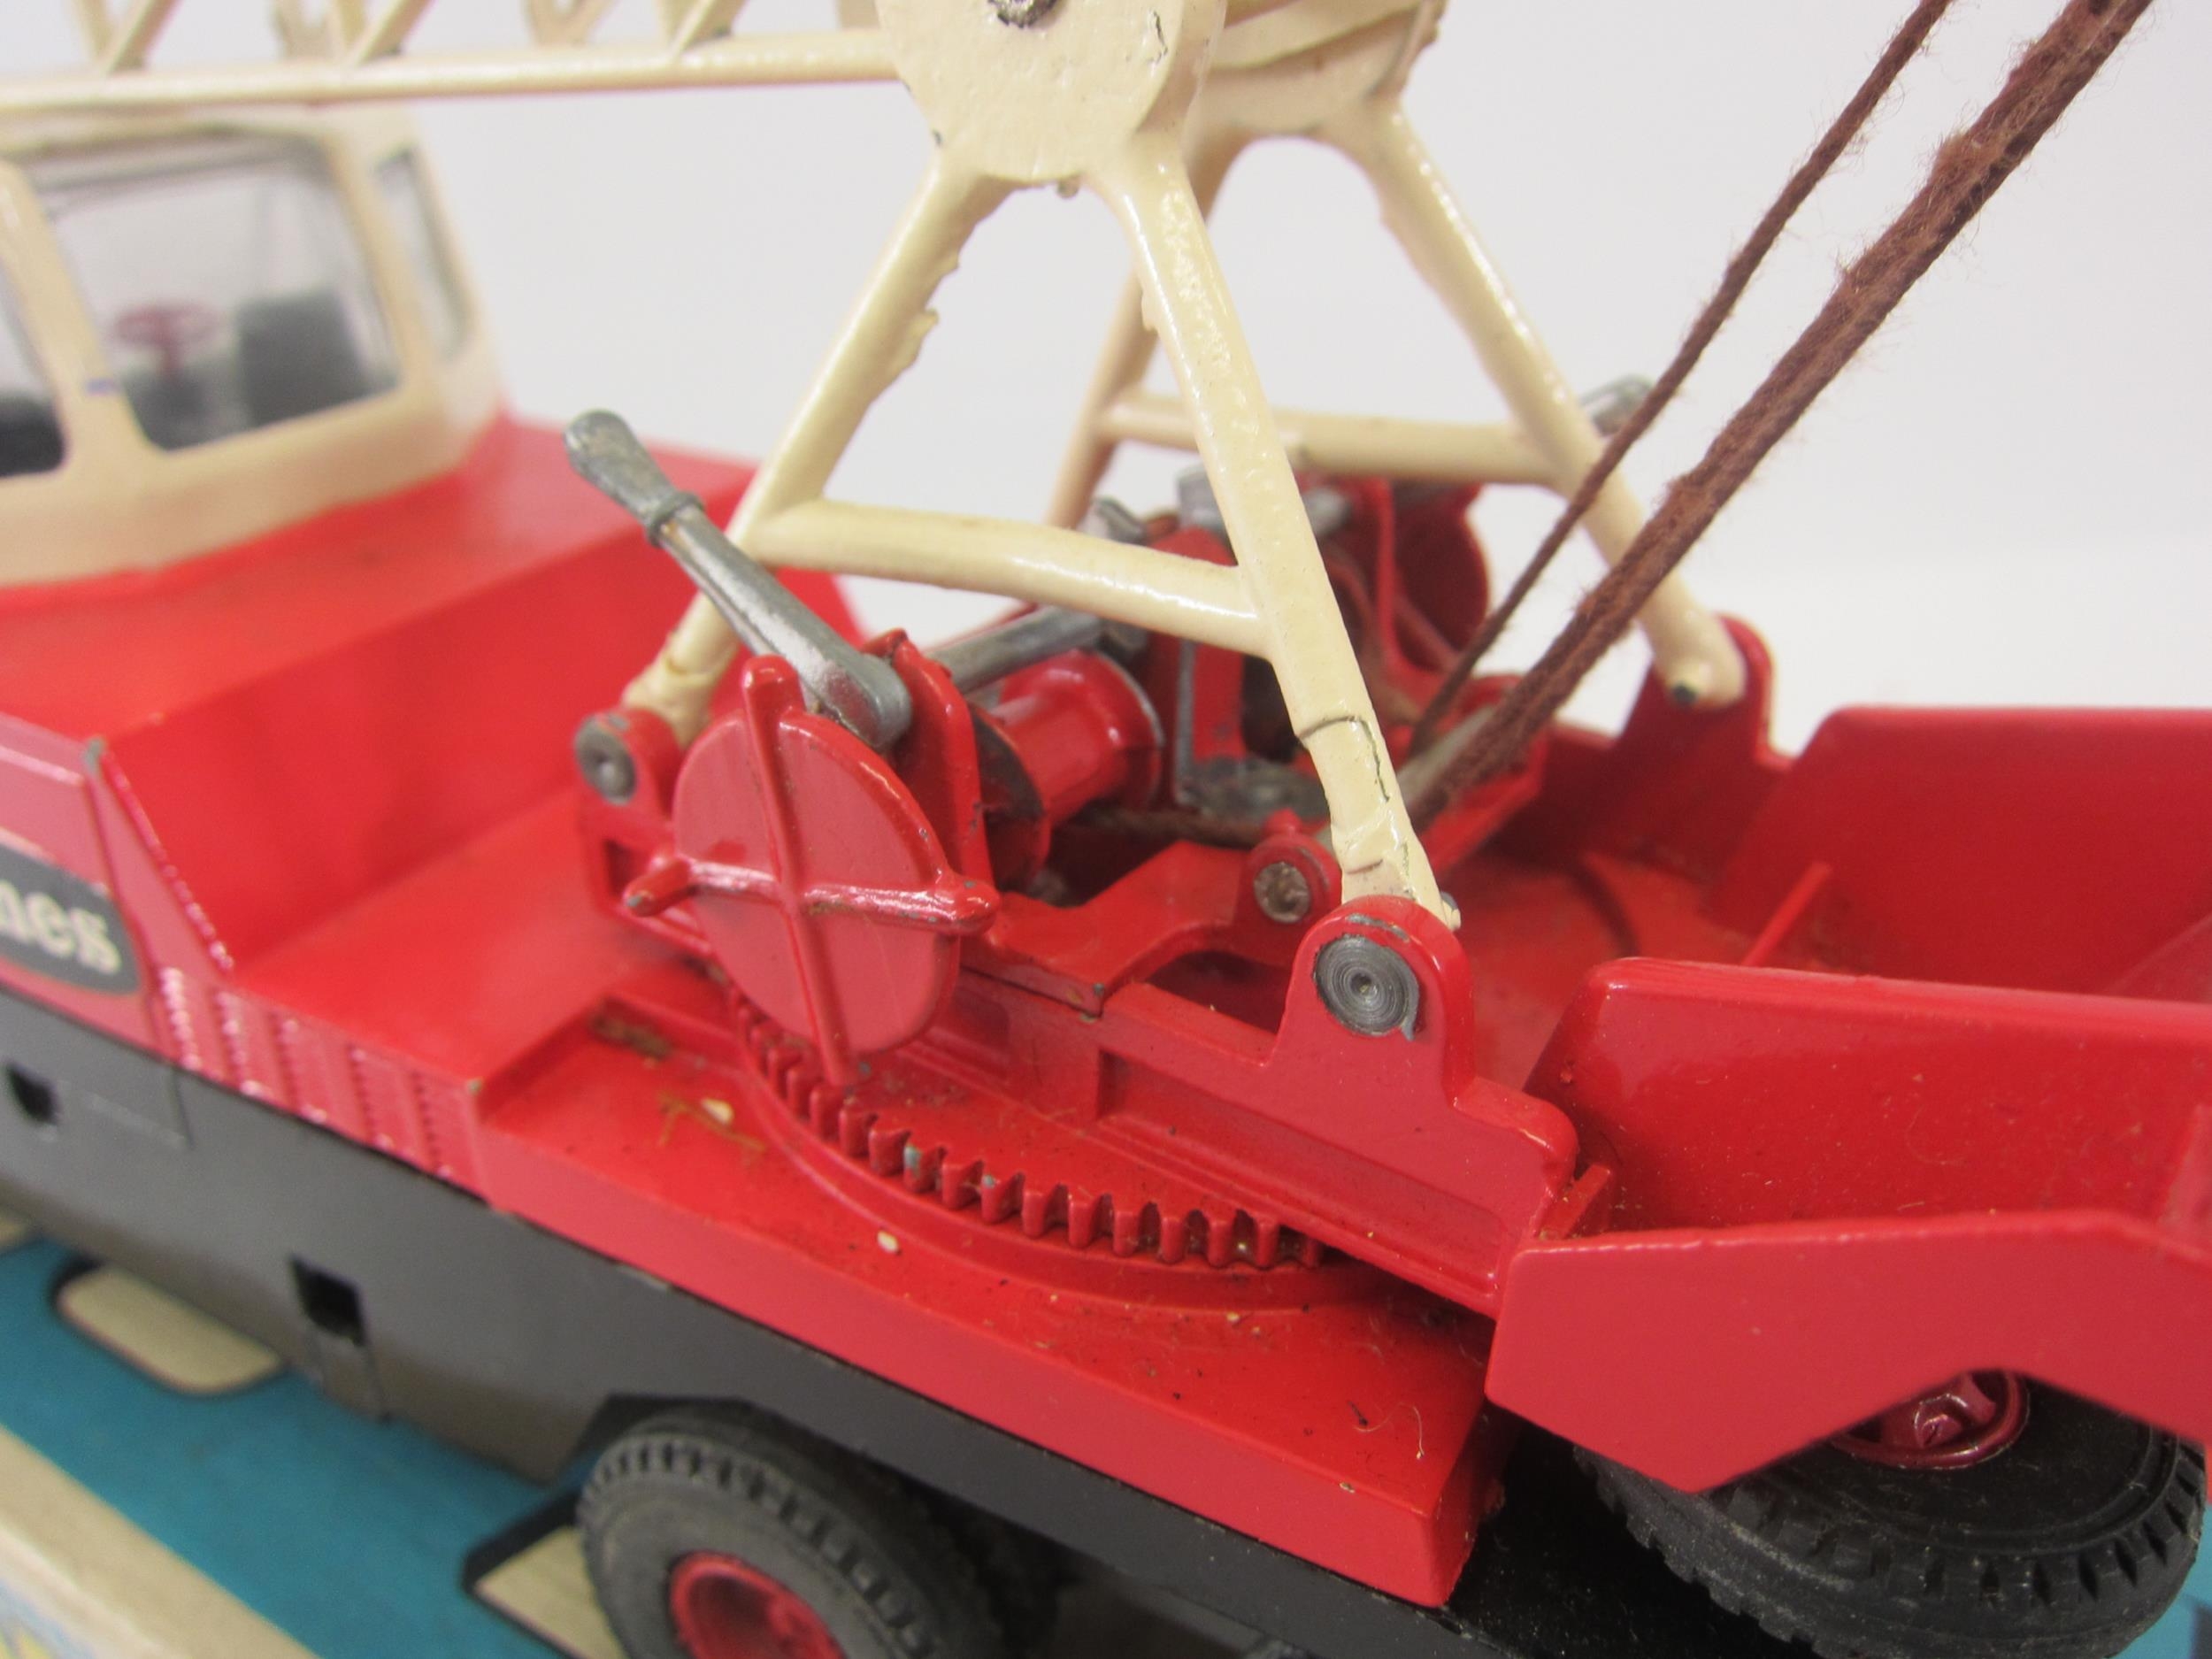 A Triang Spot-On 117 diecast model Jones Crane KL 10/10 with red body and wheel hubs, cream cab - Image 5 of 9